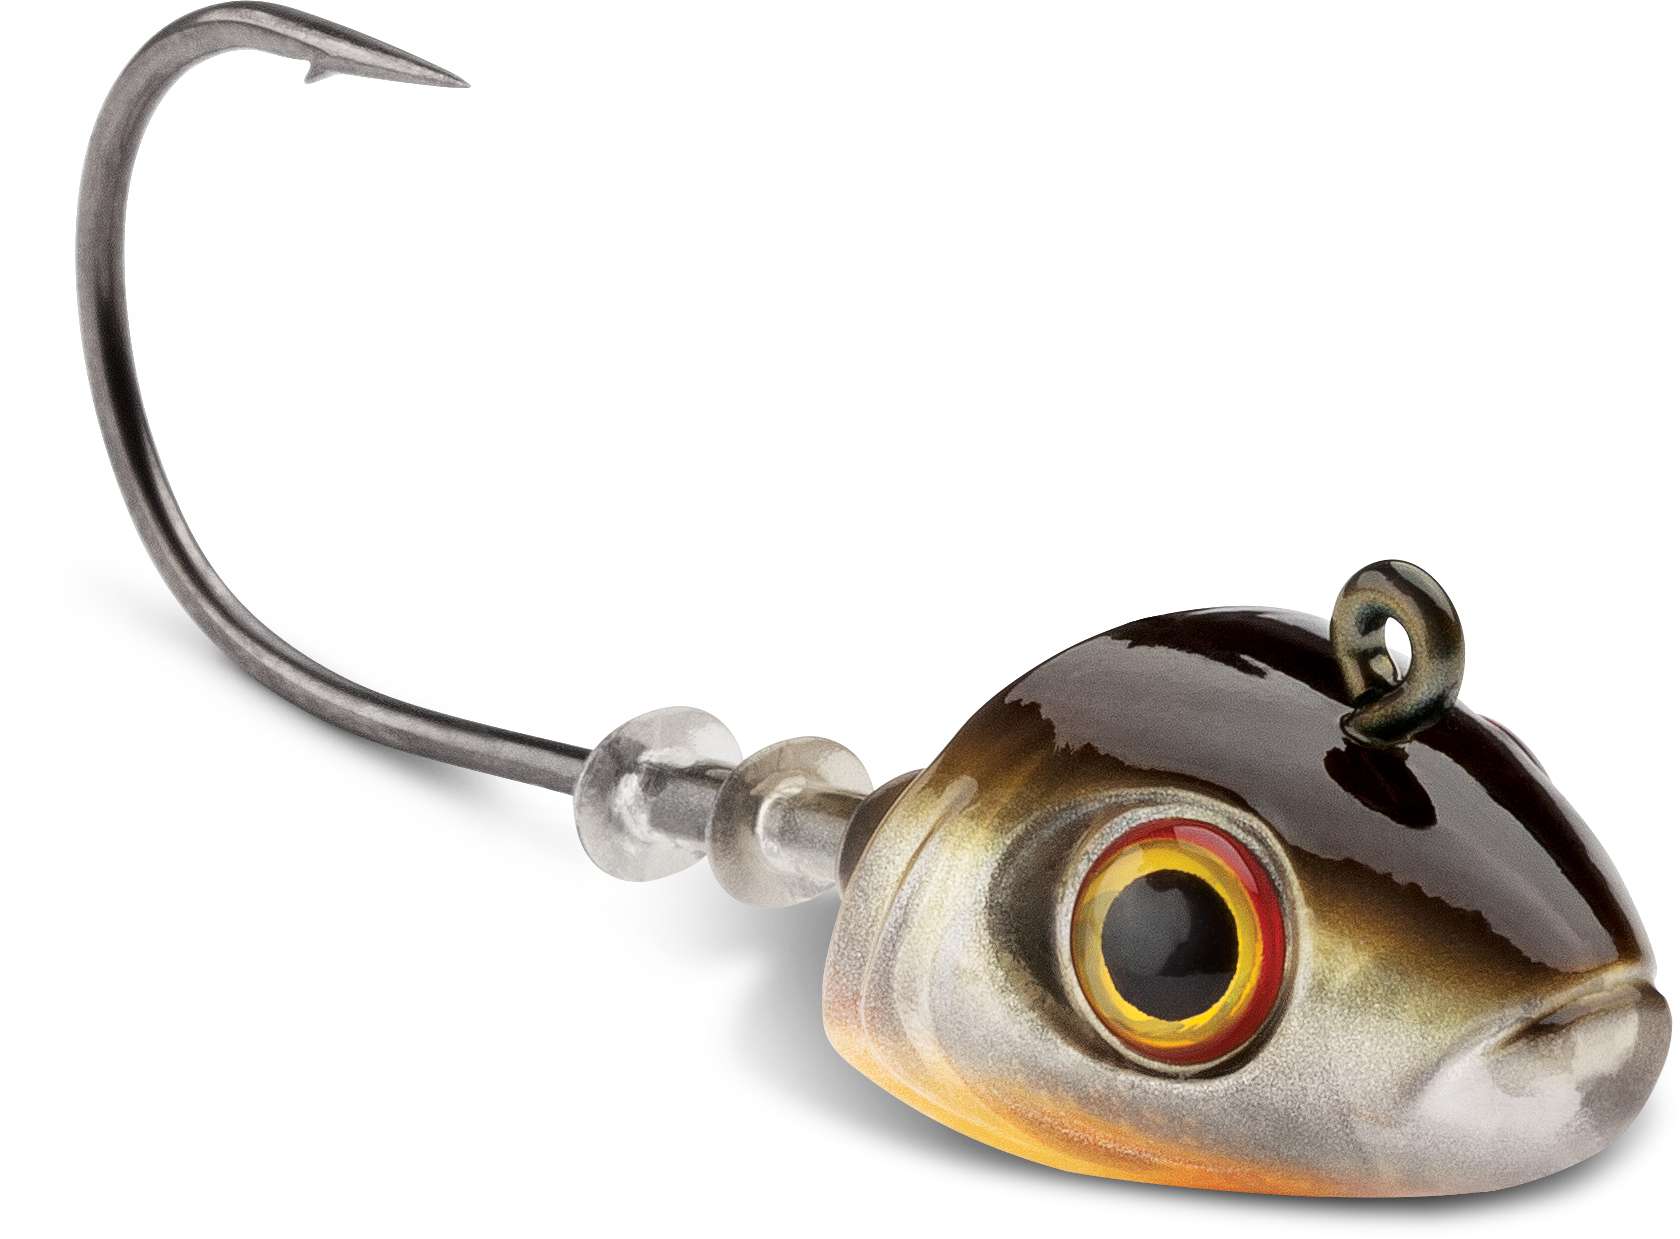 360GT jigs (New heavier weights)<BR>
Storm<BR>
$3.99-$4.99<BR>
To compliment the current lineup of 360GT Searchbait jigs theyâll now be available in heavier weights. The 3 1/2-inch Searchbait can now be used with a 1/8- or 1/4-ounce jighead, the 4 1/2-inch with a 1/4- or 3/8-ounce jighead and the 5 1/2-inch with a 3/8- or 1/2-ounce jighead.
